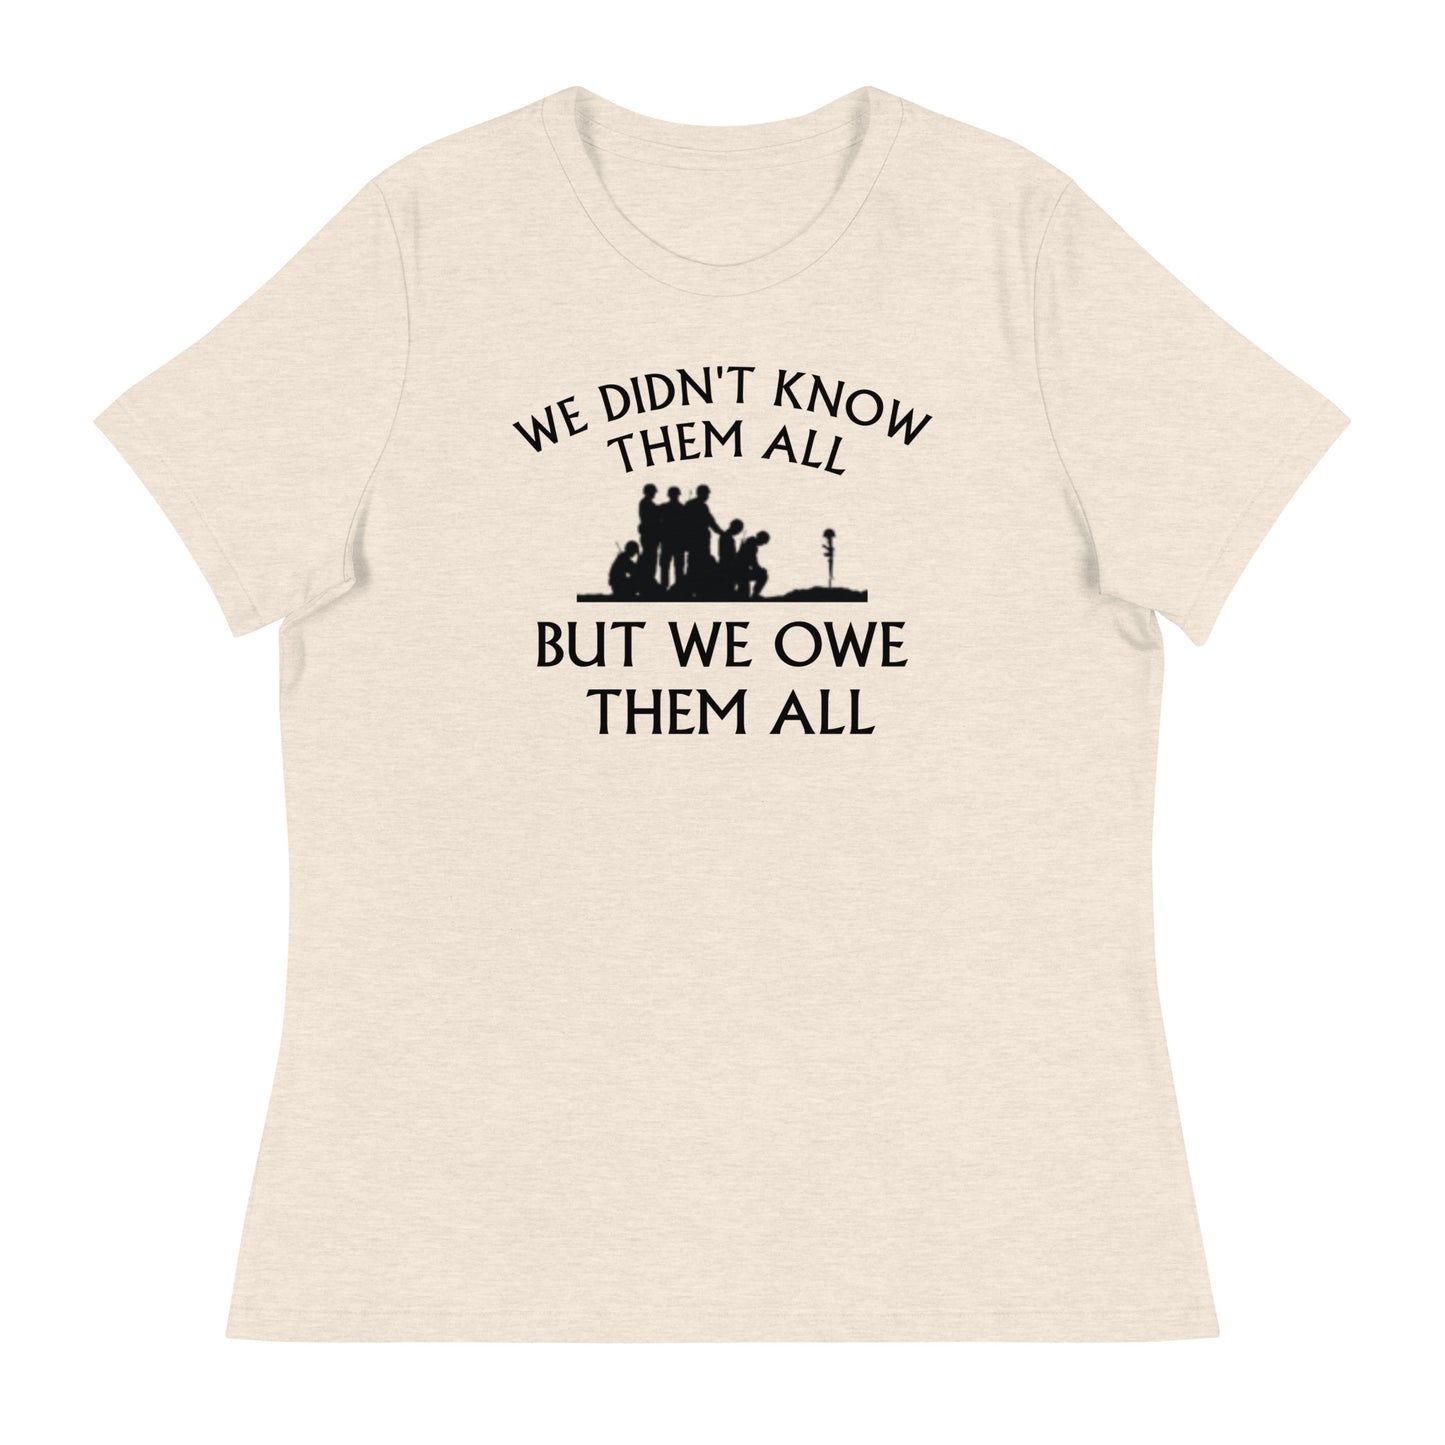 We didn't know them all but we owe them all women's tee